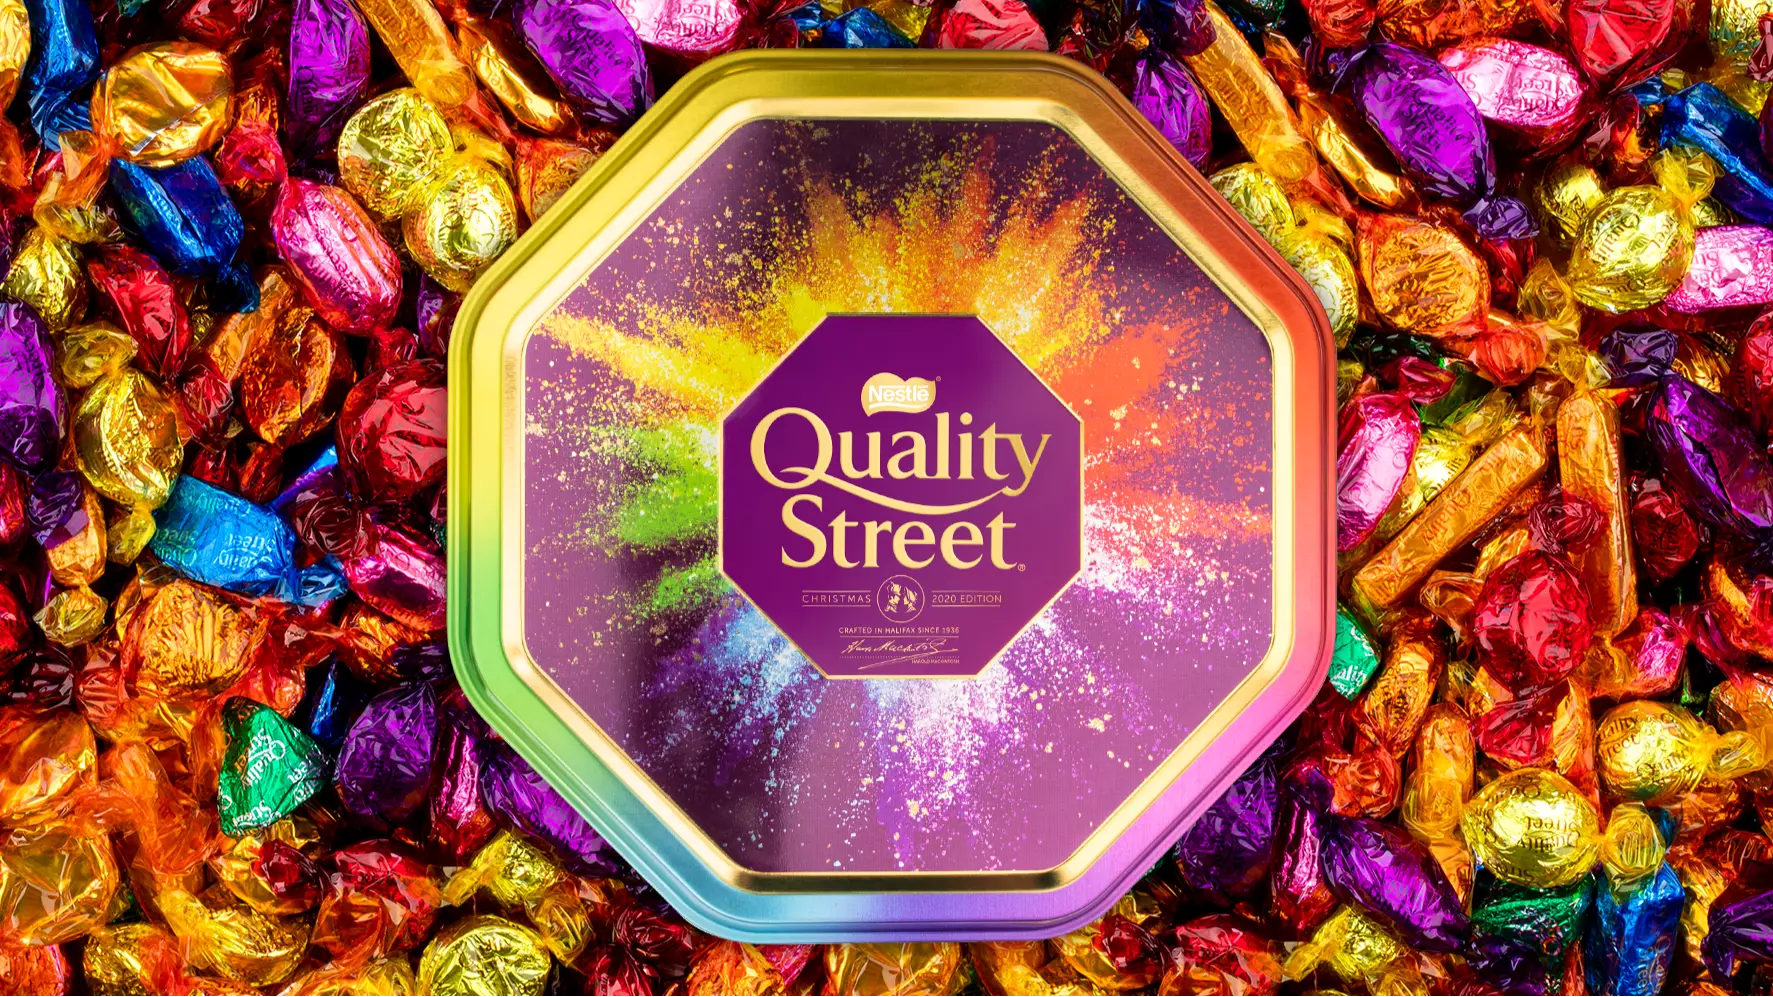 ​You Can Now Order Pick 'N' Mix Quality Street Tins Online